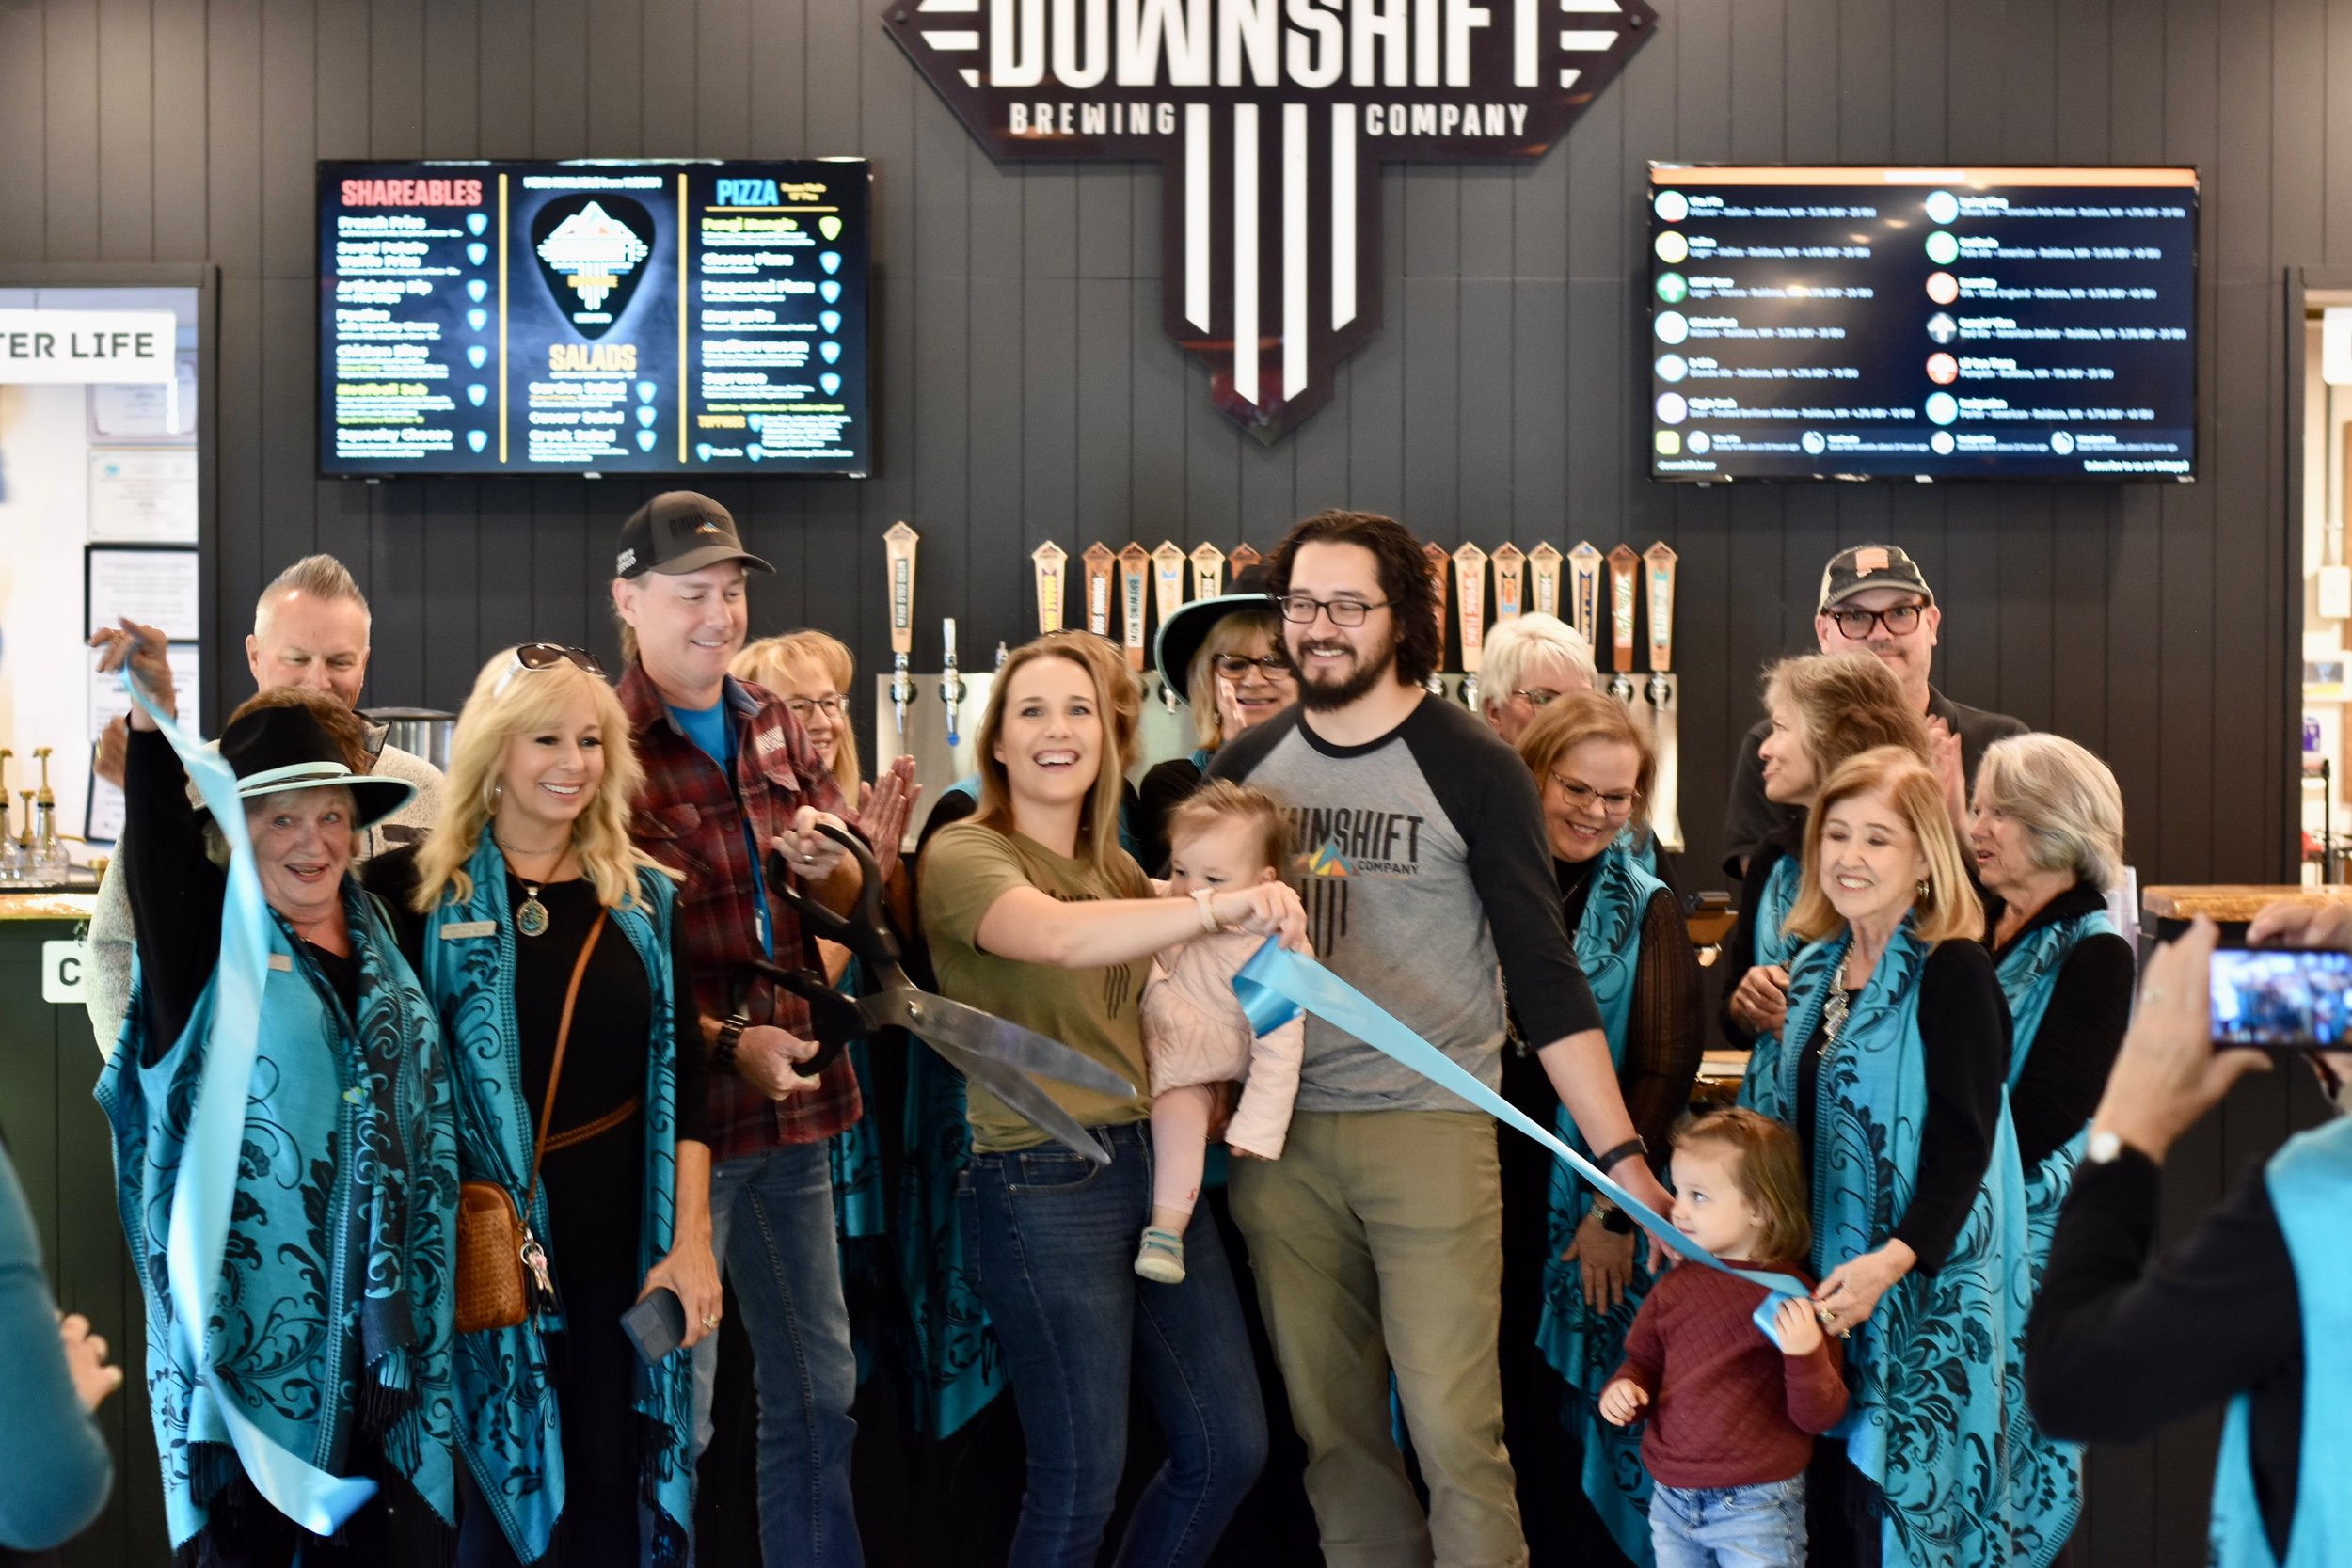 Downshift Brewing Company founders Shelby and Eddie Gutierrez